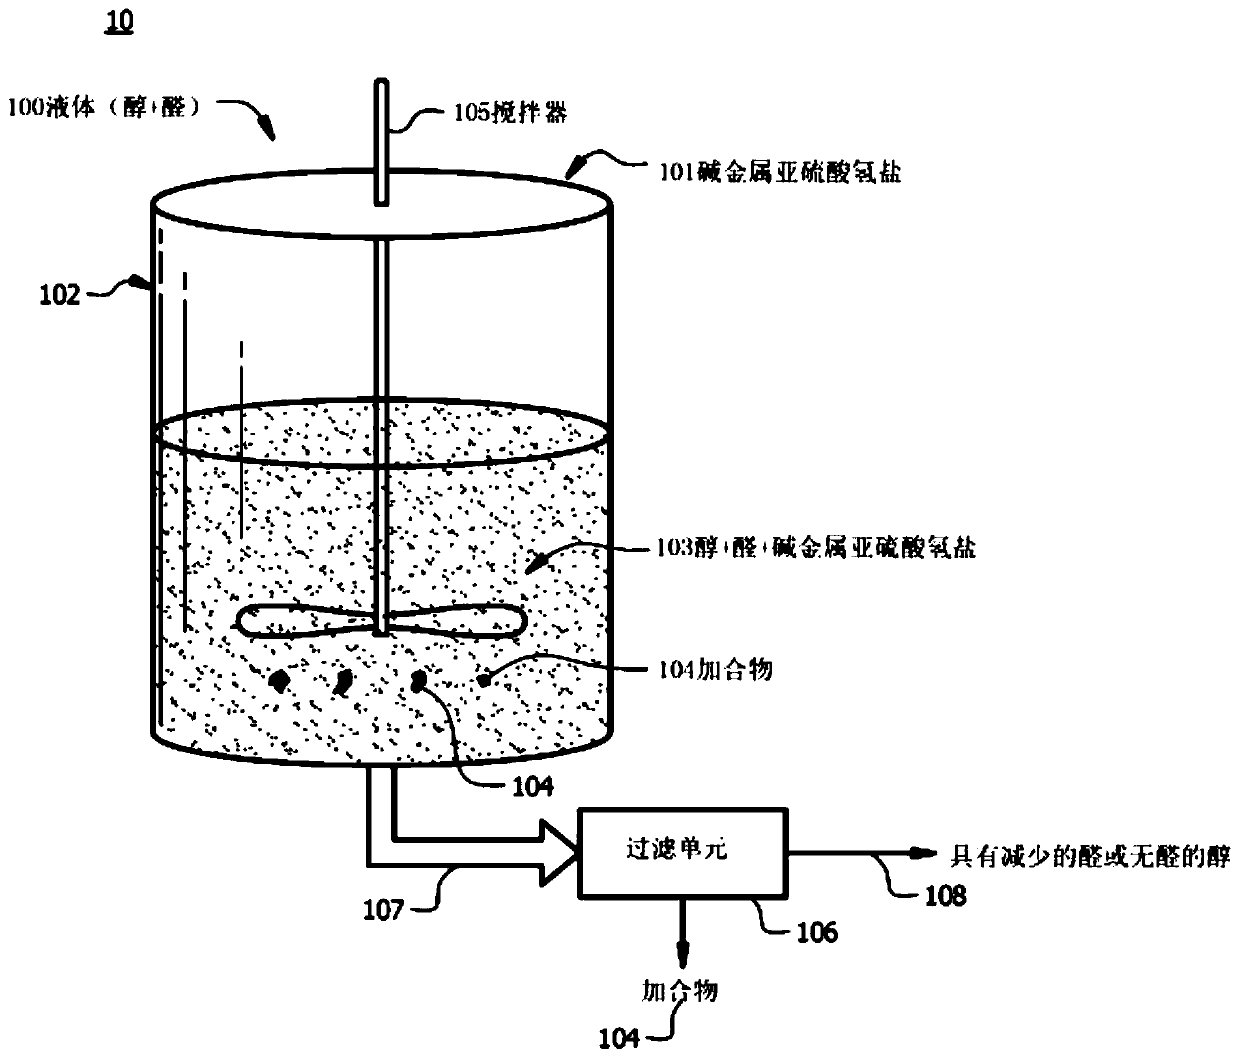 Process for aldehyde removal from alcohols by treatment with bisulphite